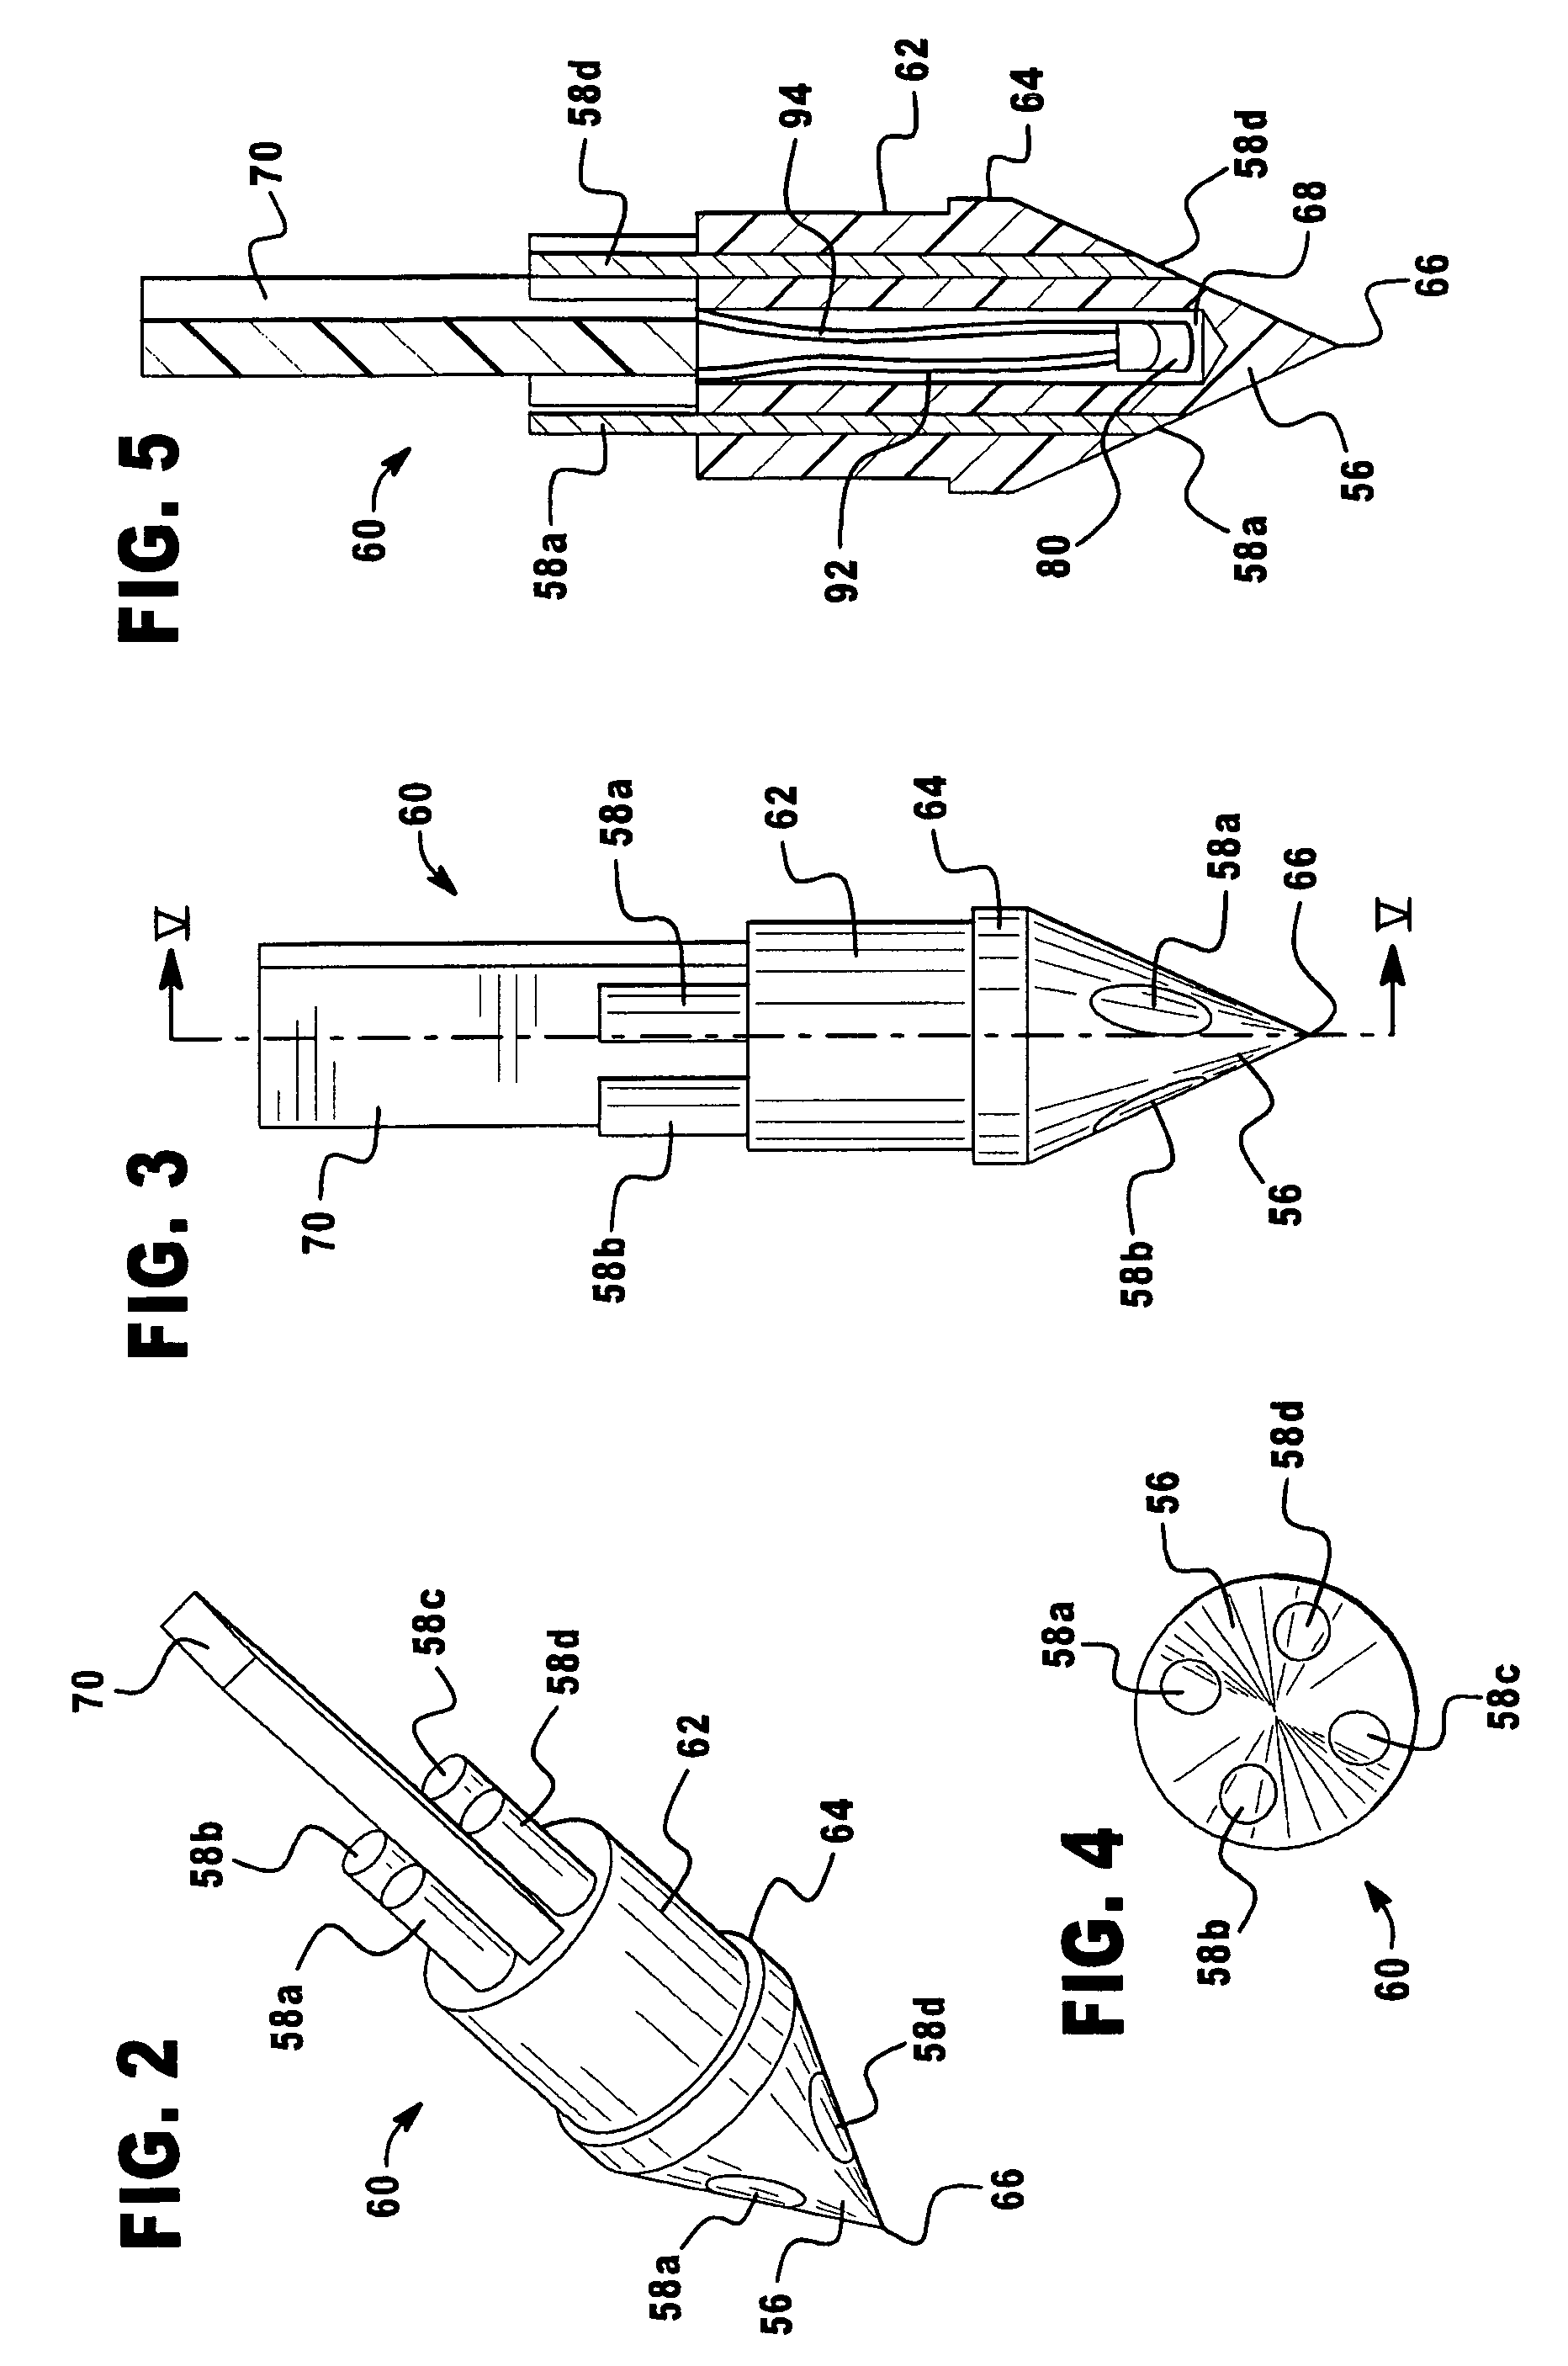 Soil probe device and method of making same